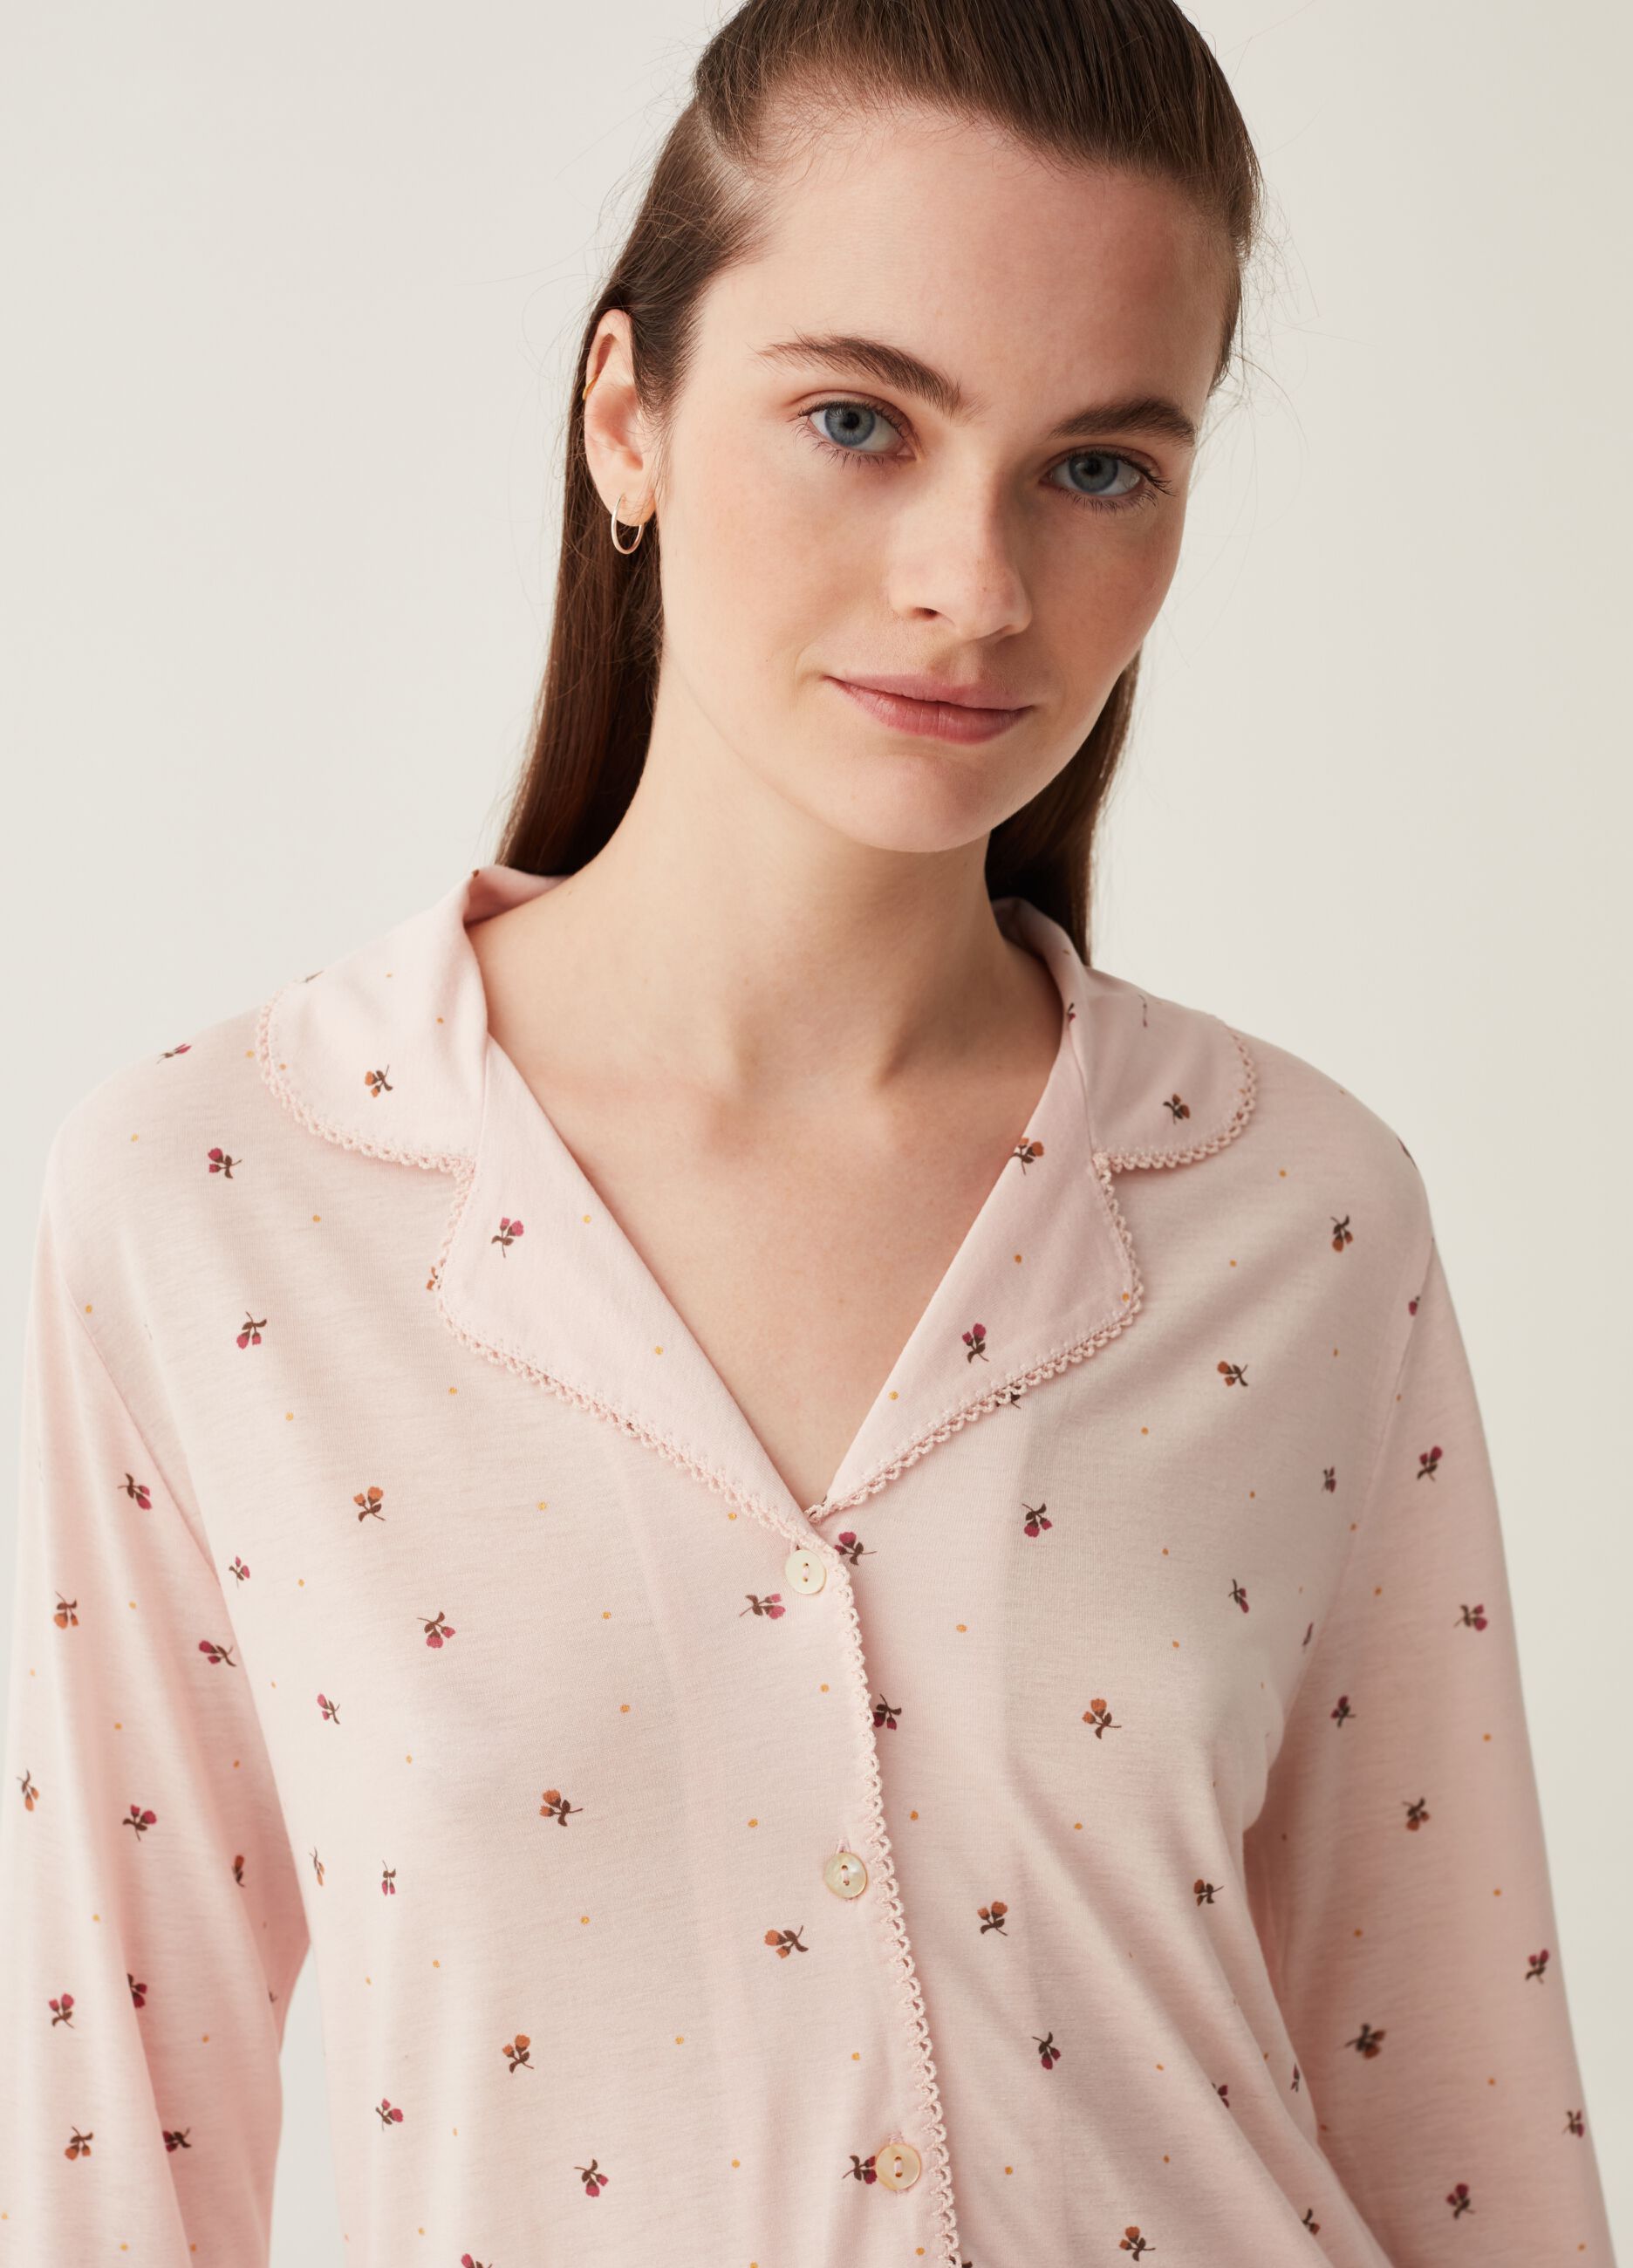 Pyjamas with polka dot and small flowers pattern_1